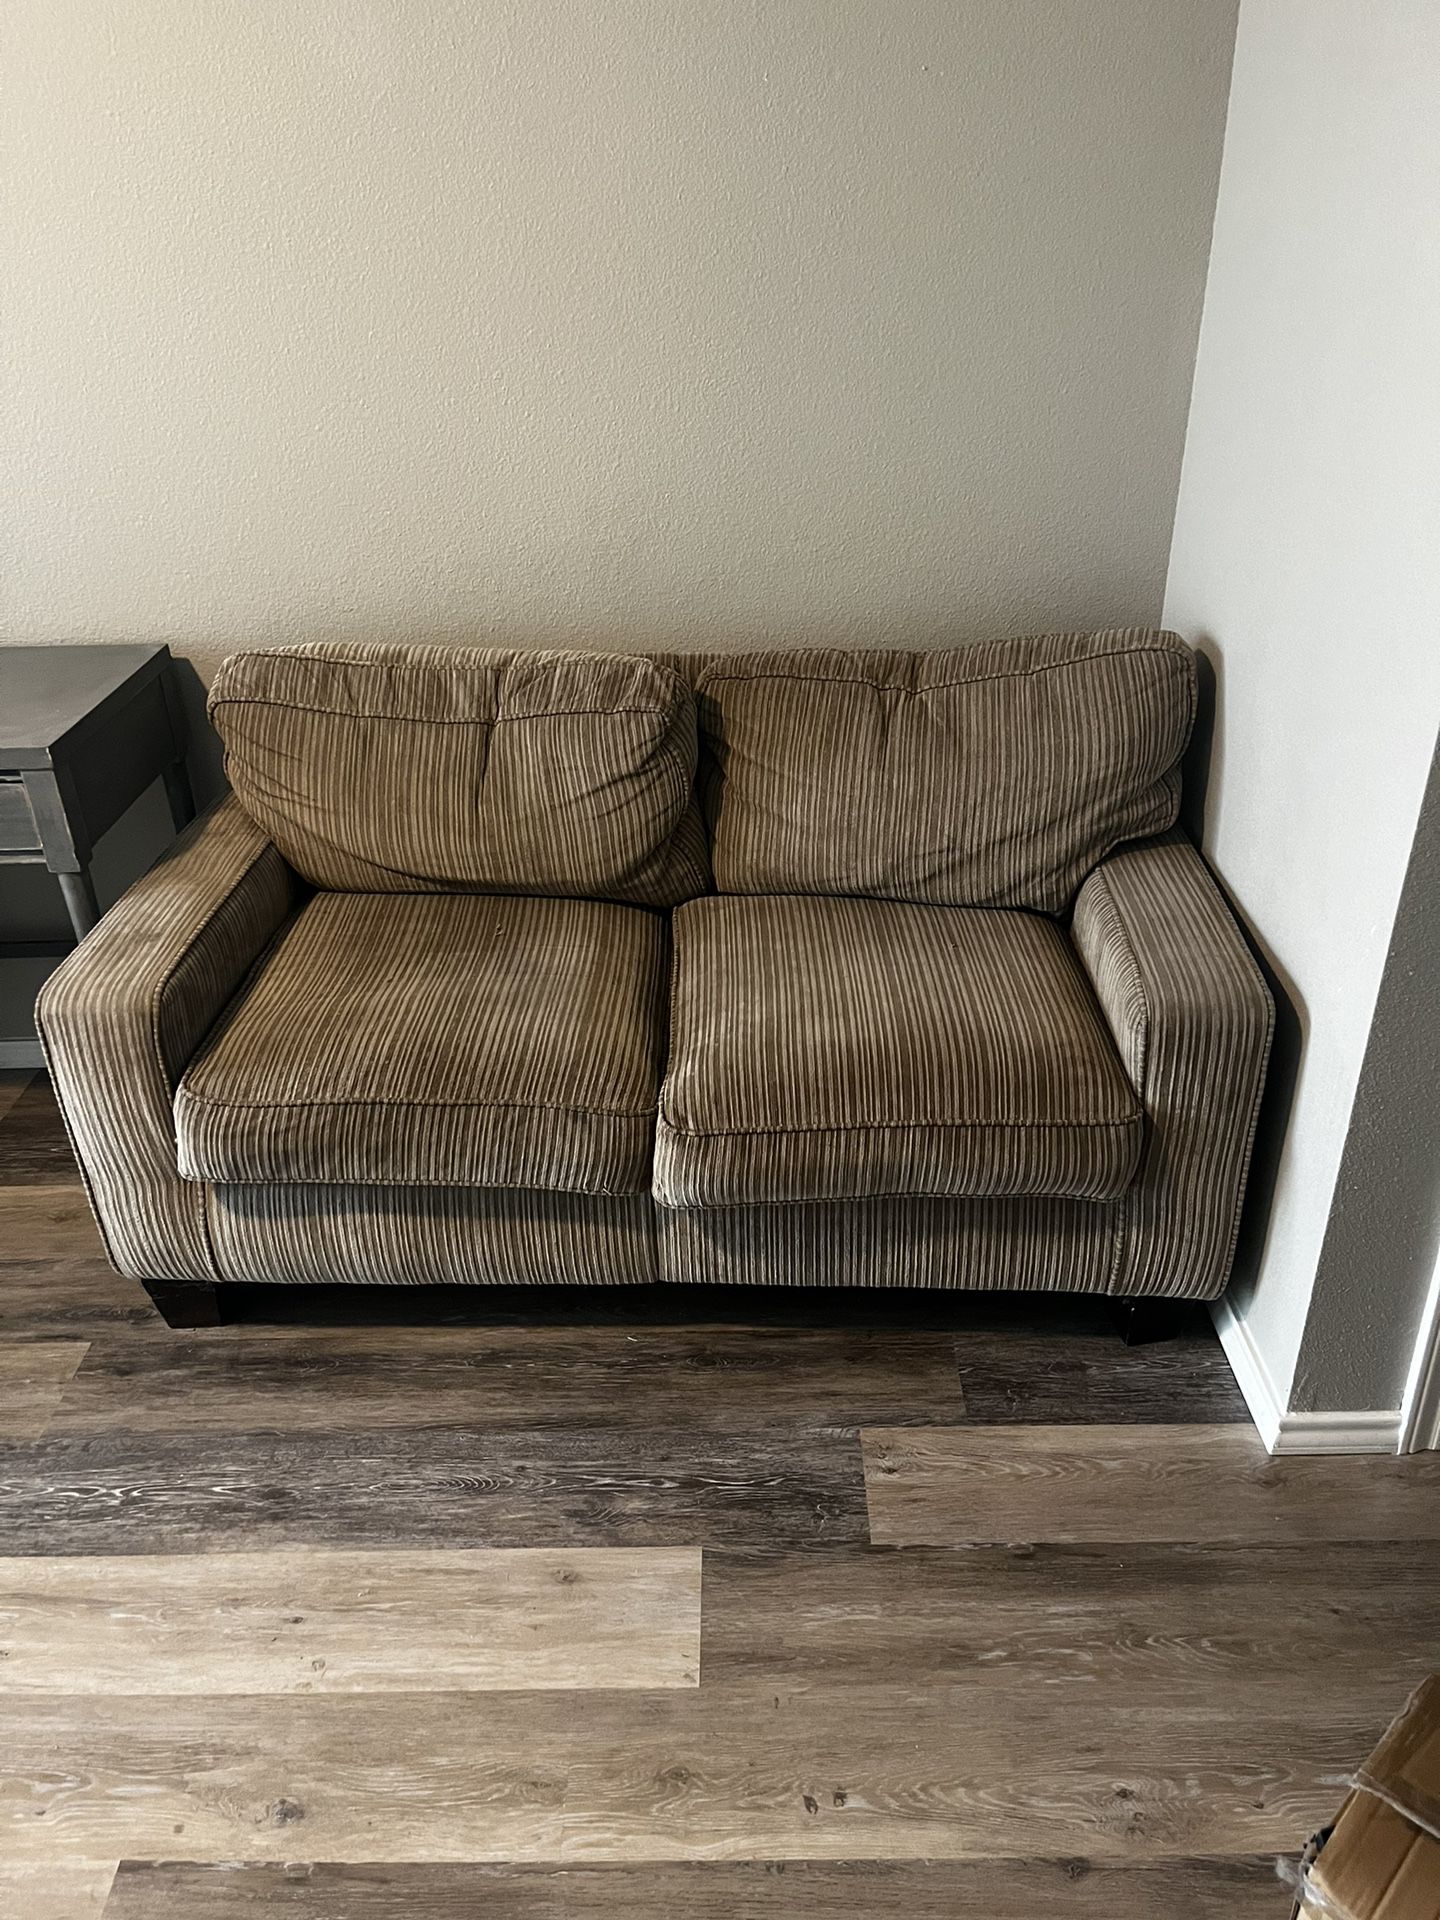 Furniture For sell